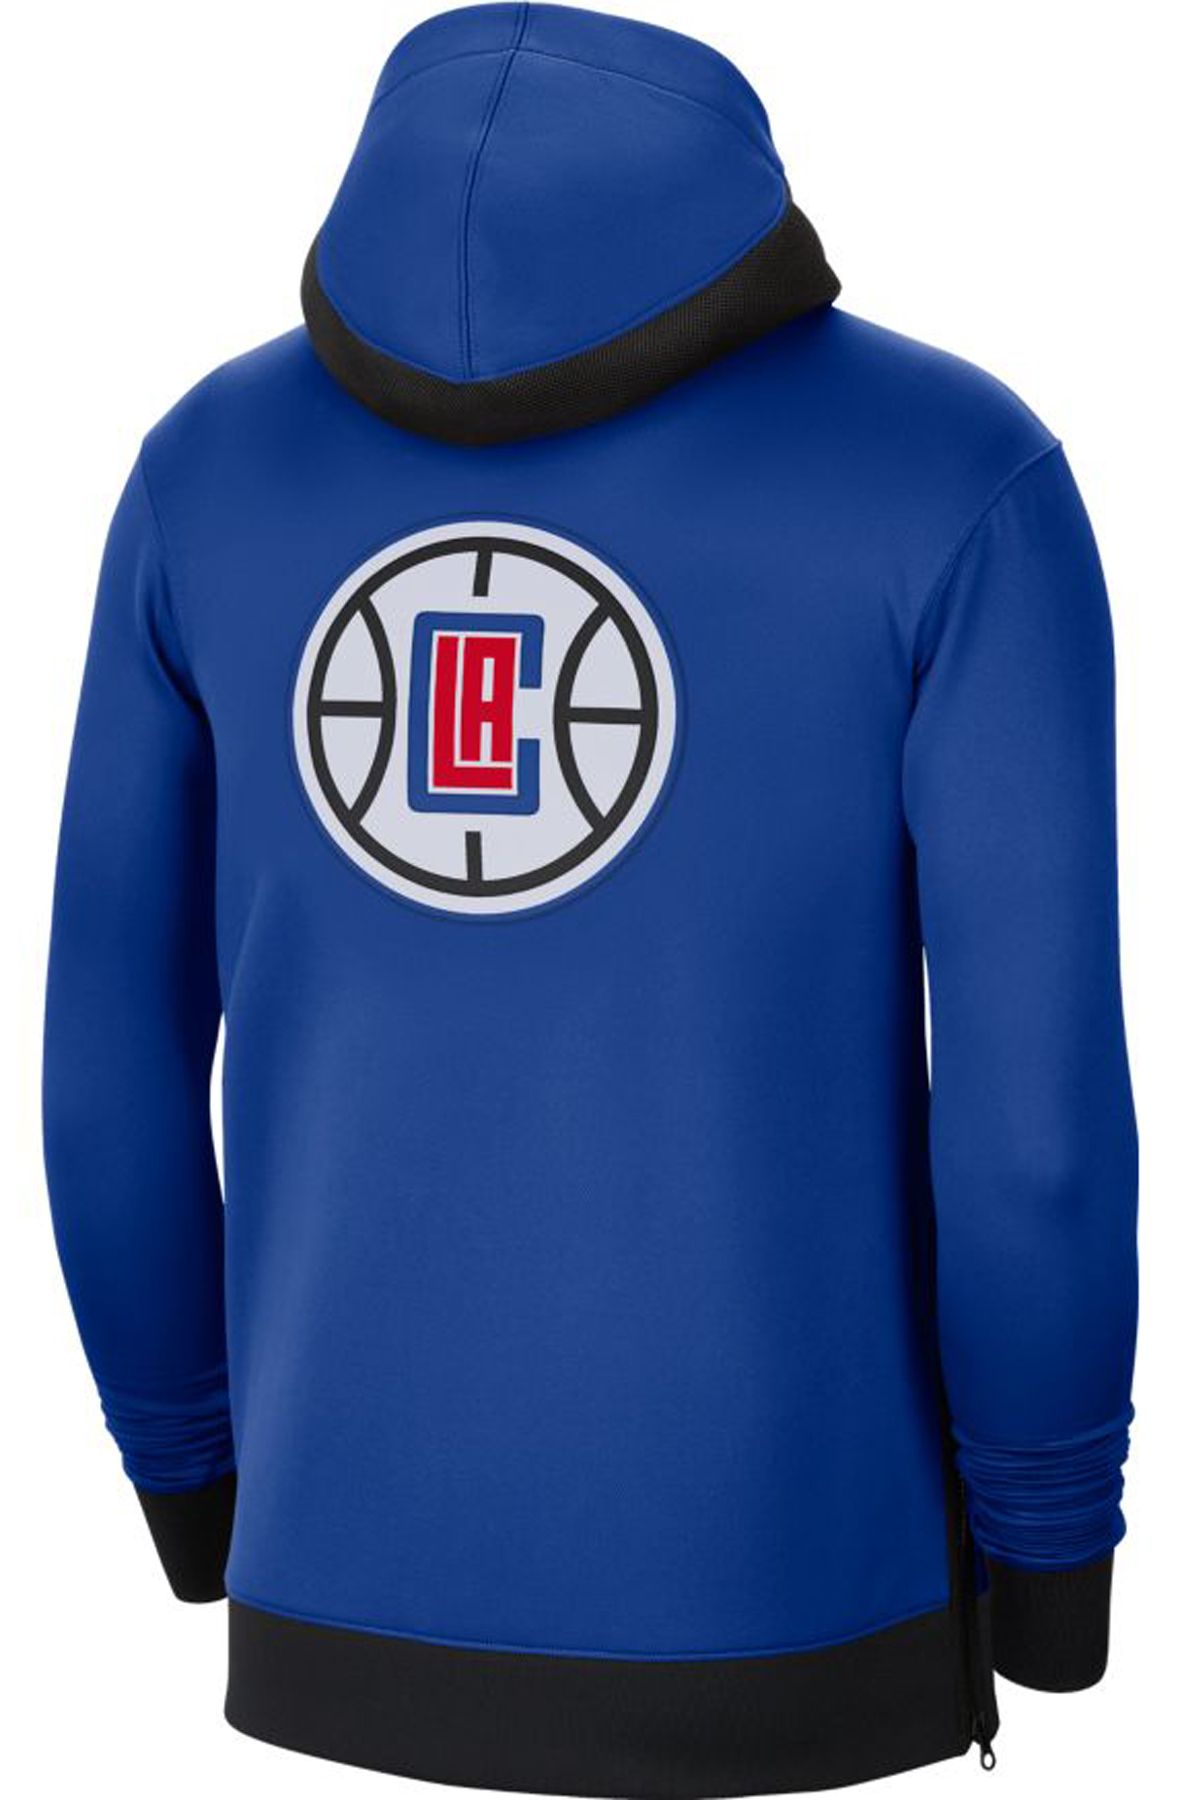 NWT Nike Los Angeles Clippers Showtime Warm Up Zip Up Hoodie Size